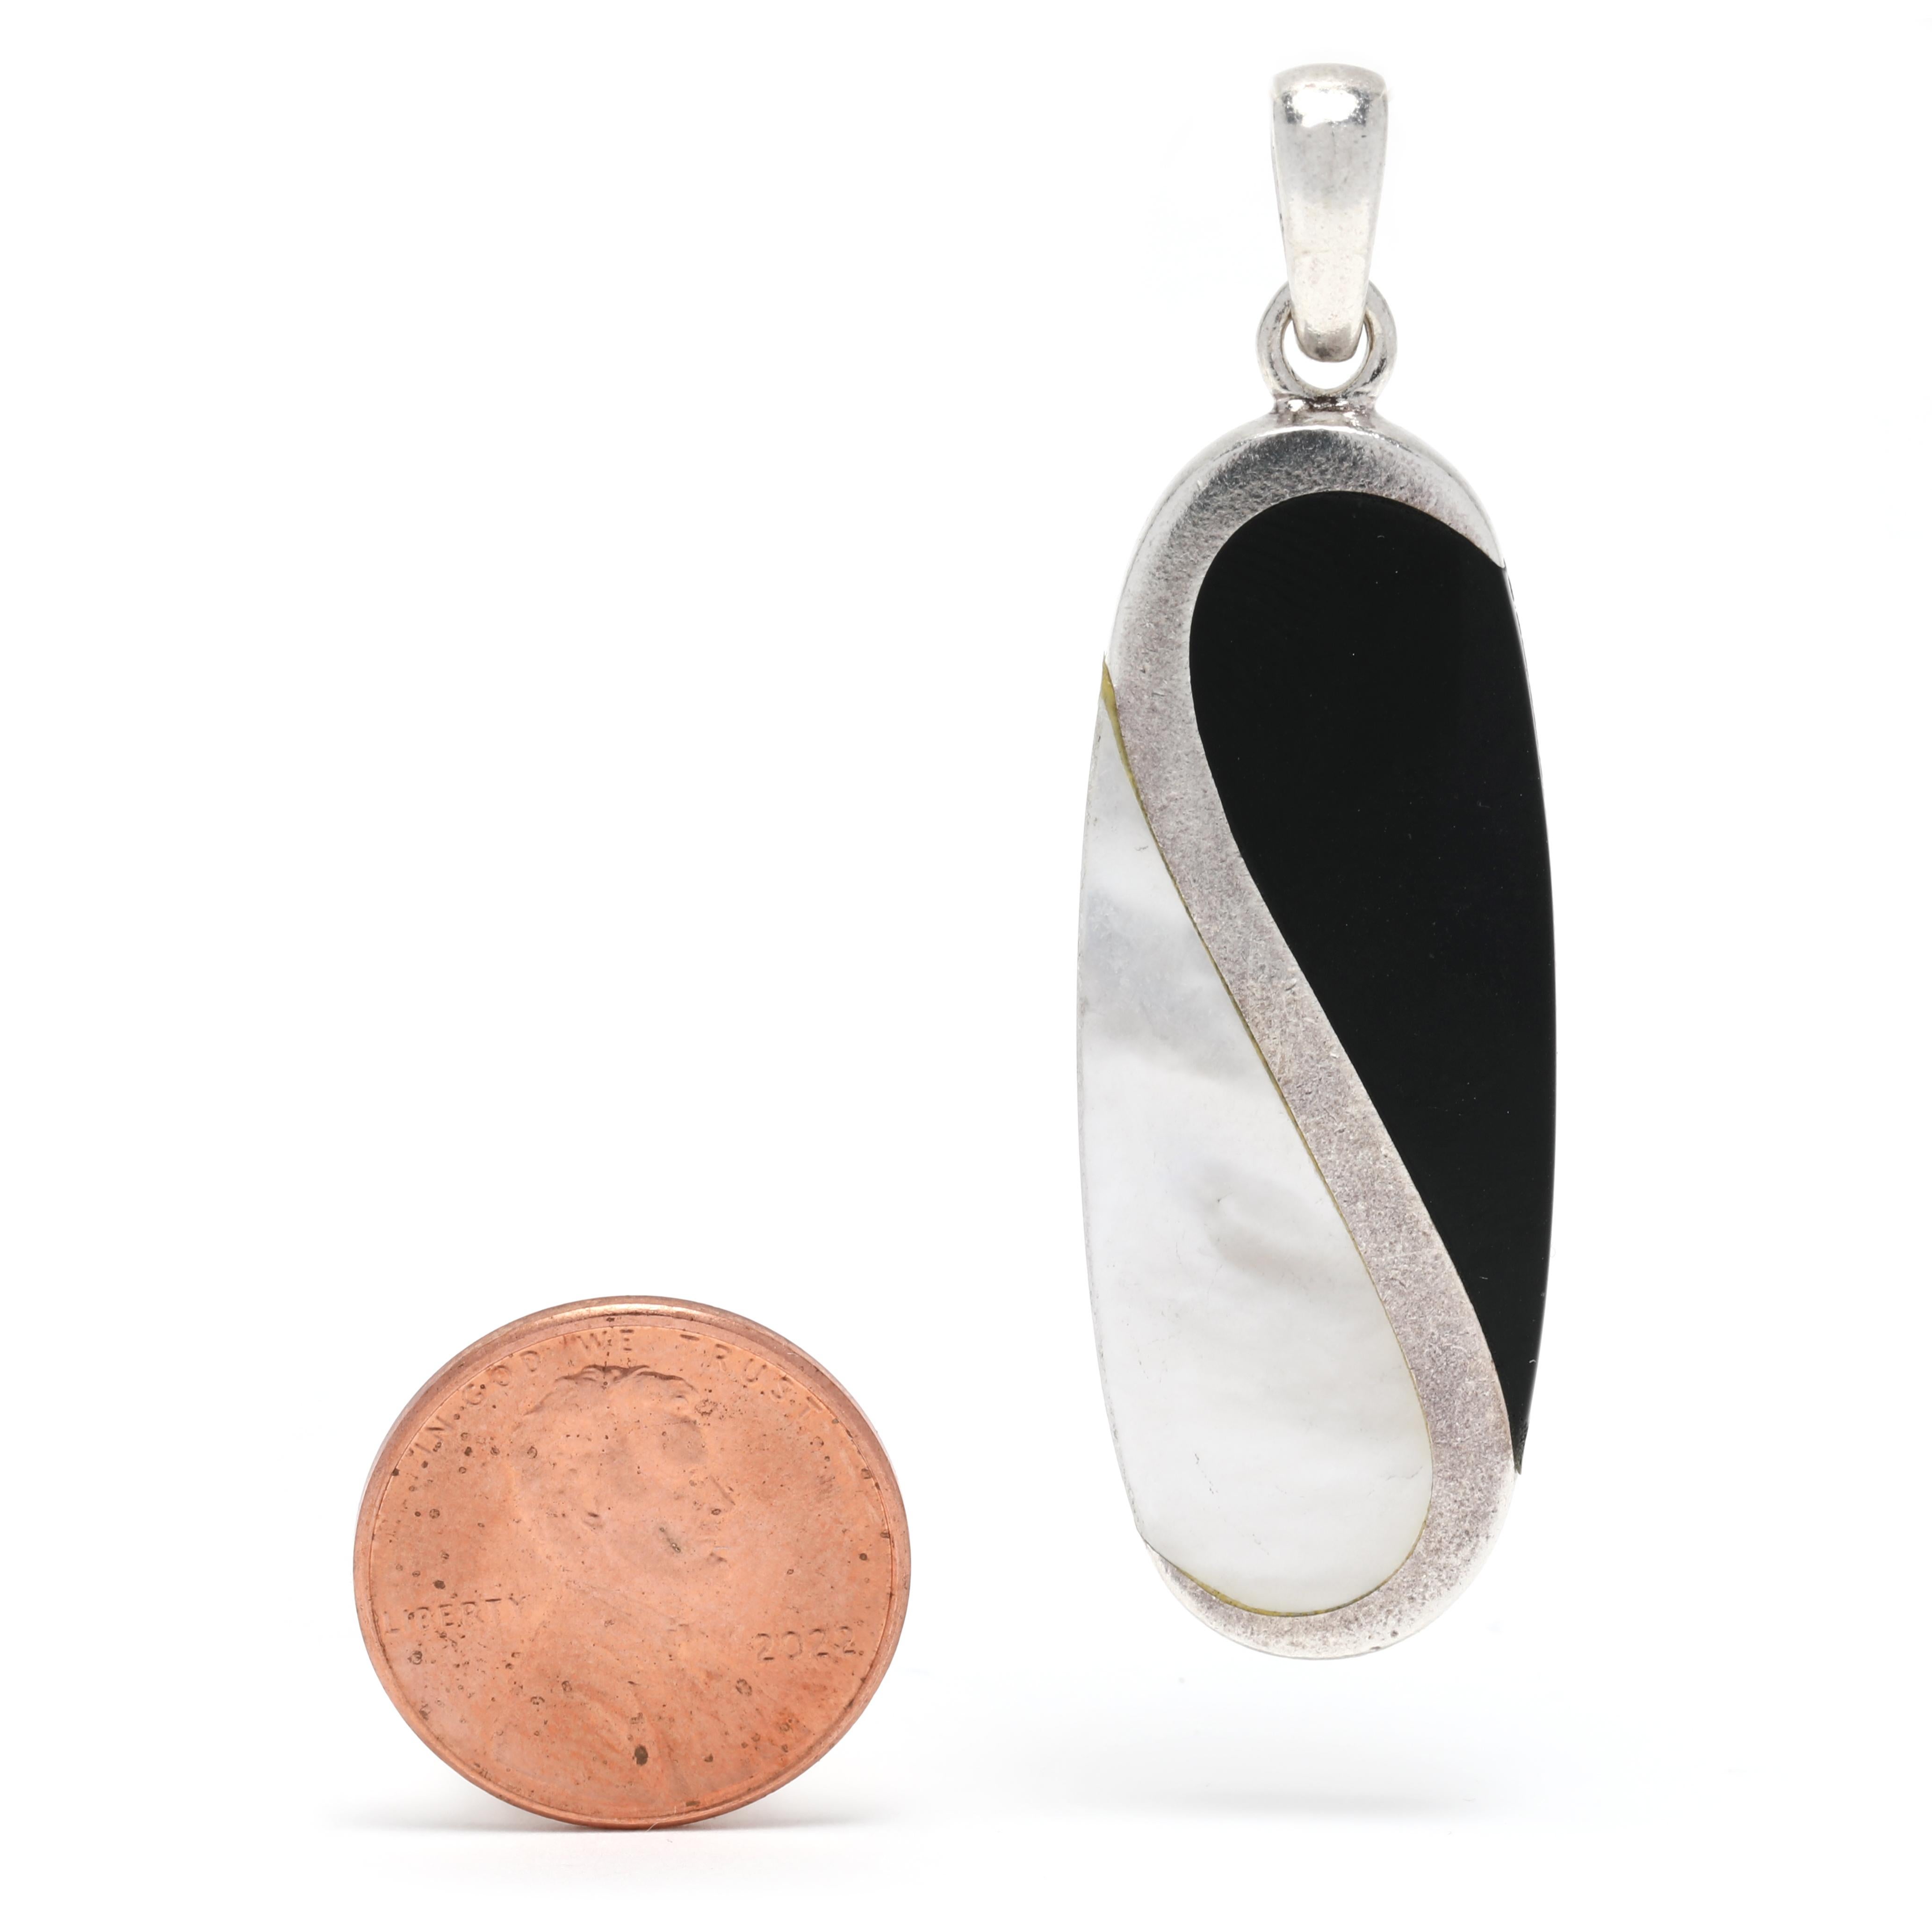 This Yin and Yang black onyx and mother of pearl long oval pendant is a perfect representation of the harmony and balance of opposites, in a beautiful and elegant design. Crafted from sterling silver, the pendant measures 2 1/8 inches in length,